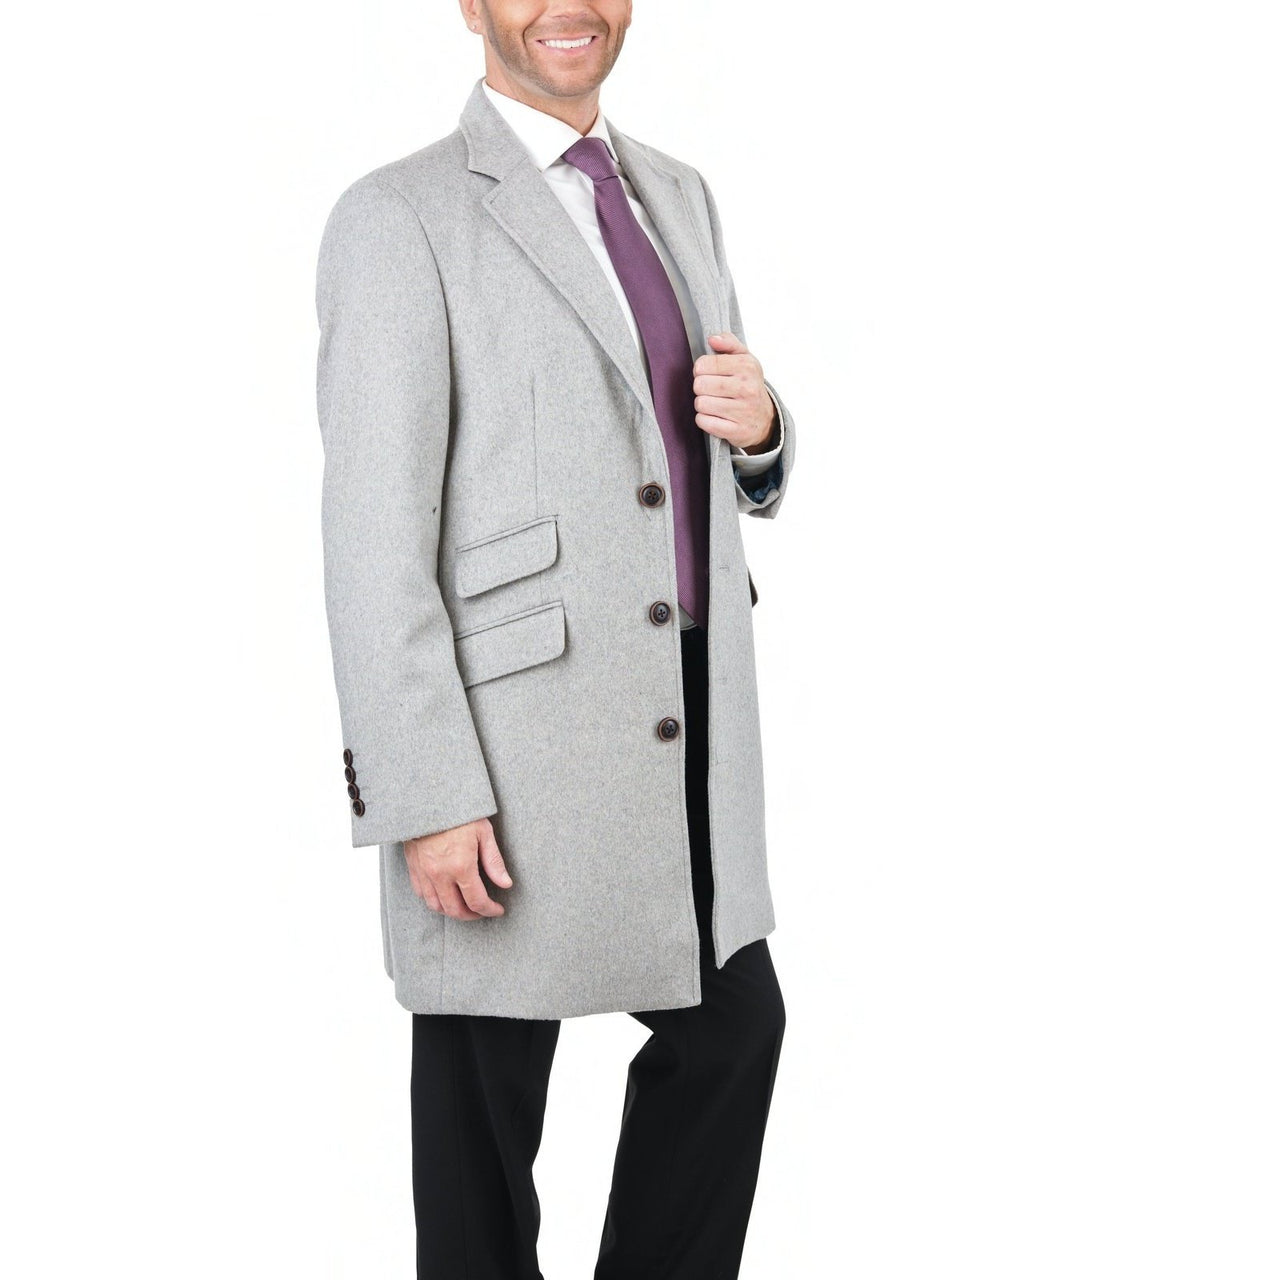 Arthur Black OUTERWEAR The Suit Depot Men's Wool Cashmere Single Breasted Light Gray 3/4 Length Top Coat